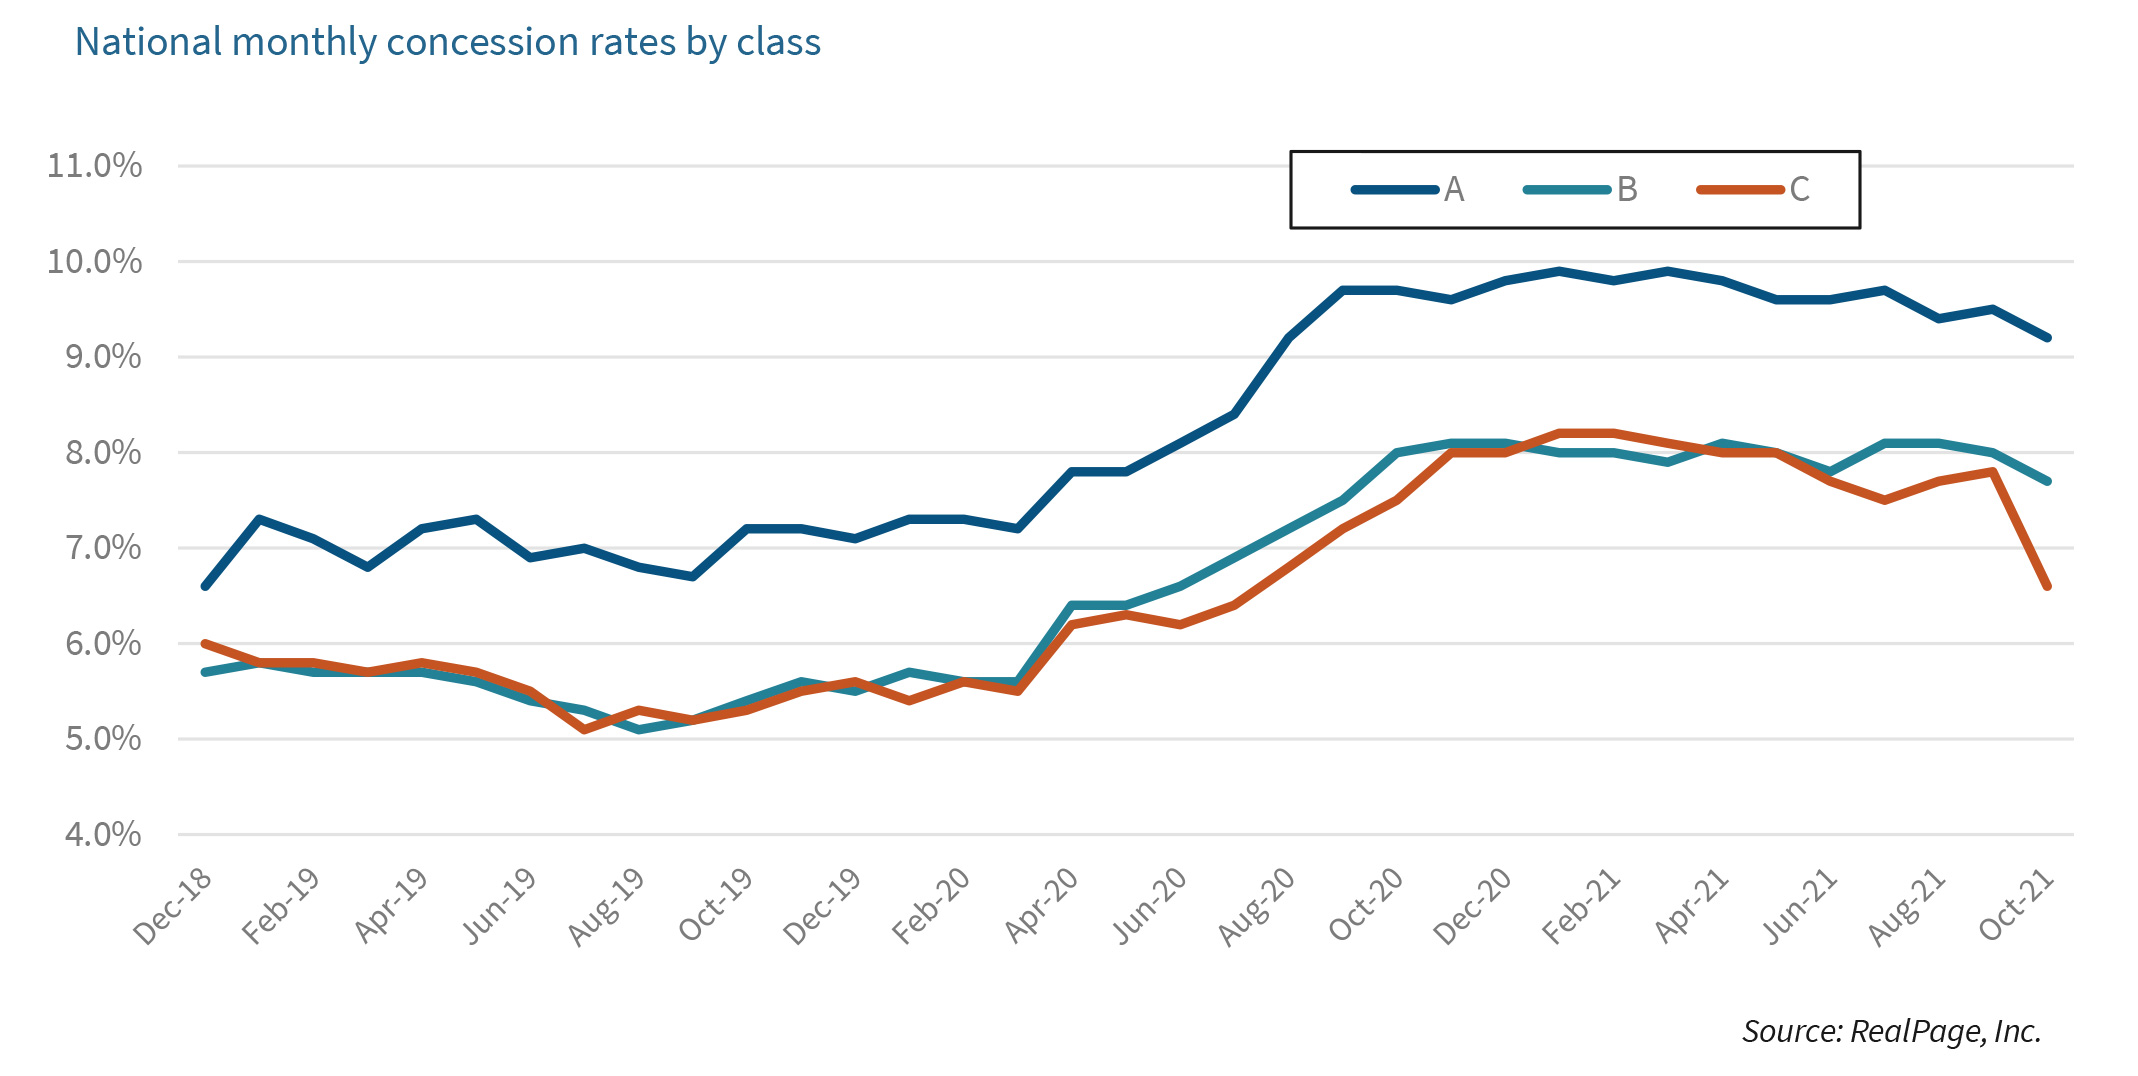 National monthly concession rates by class